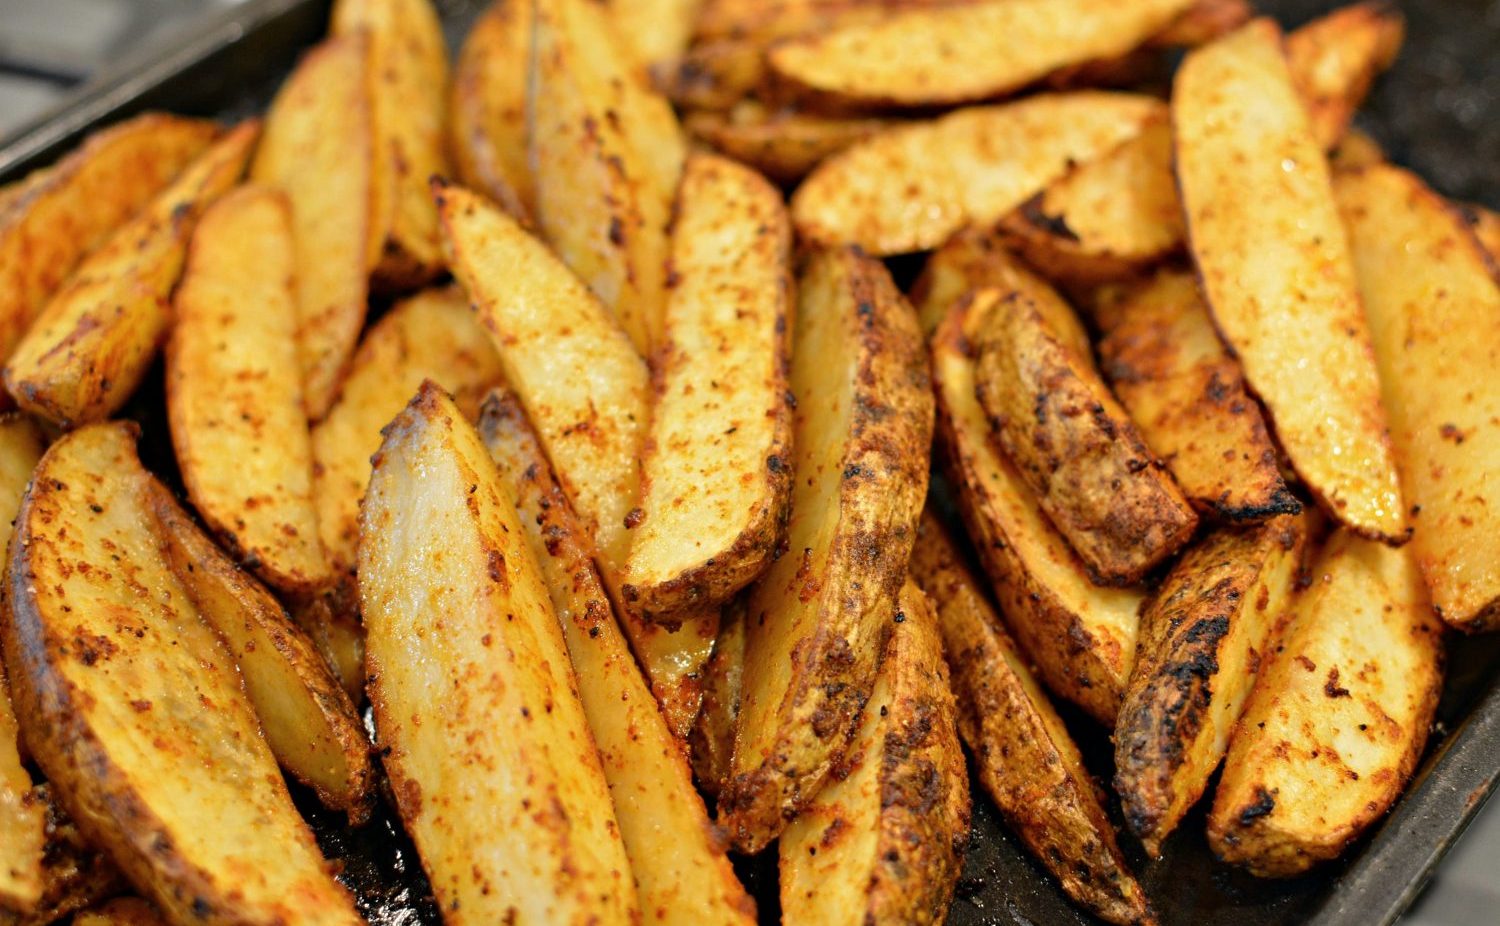 Dip These Foods in Sauces and We’ll Guess Your Eye Color Potato wedges